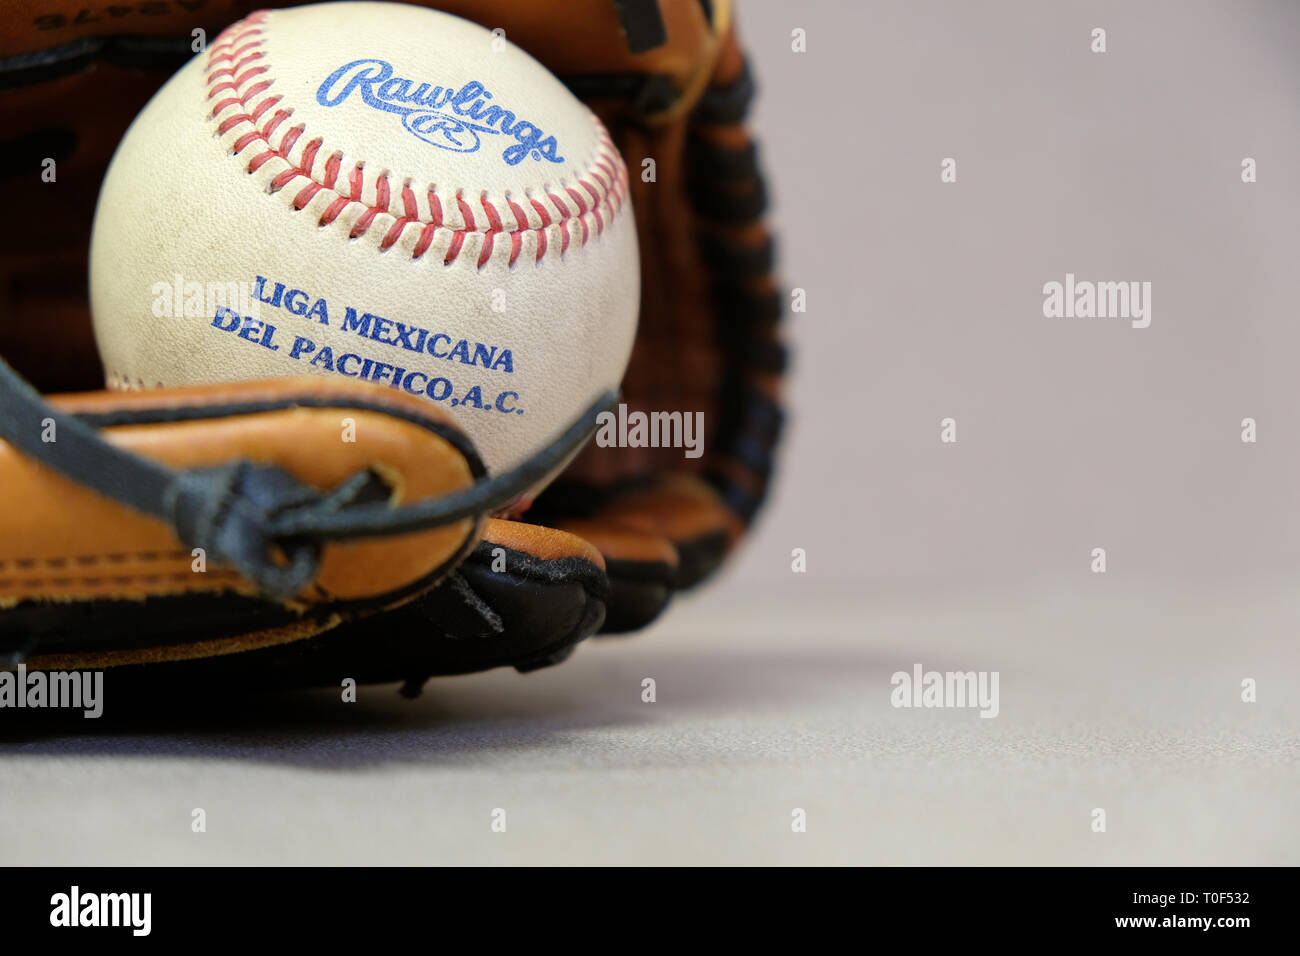 Game ball caught at a Mexican winter league game; Liga Mexicana del  Pacifico; baseball and glove Stock Photo - Alamy